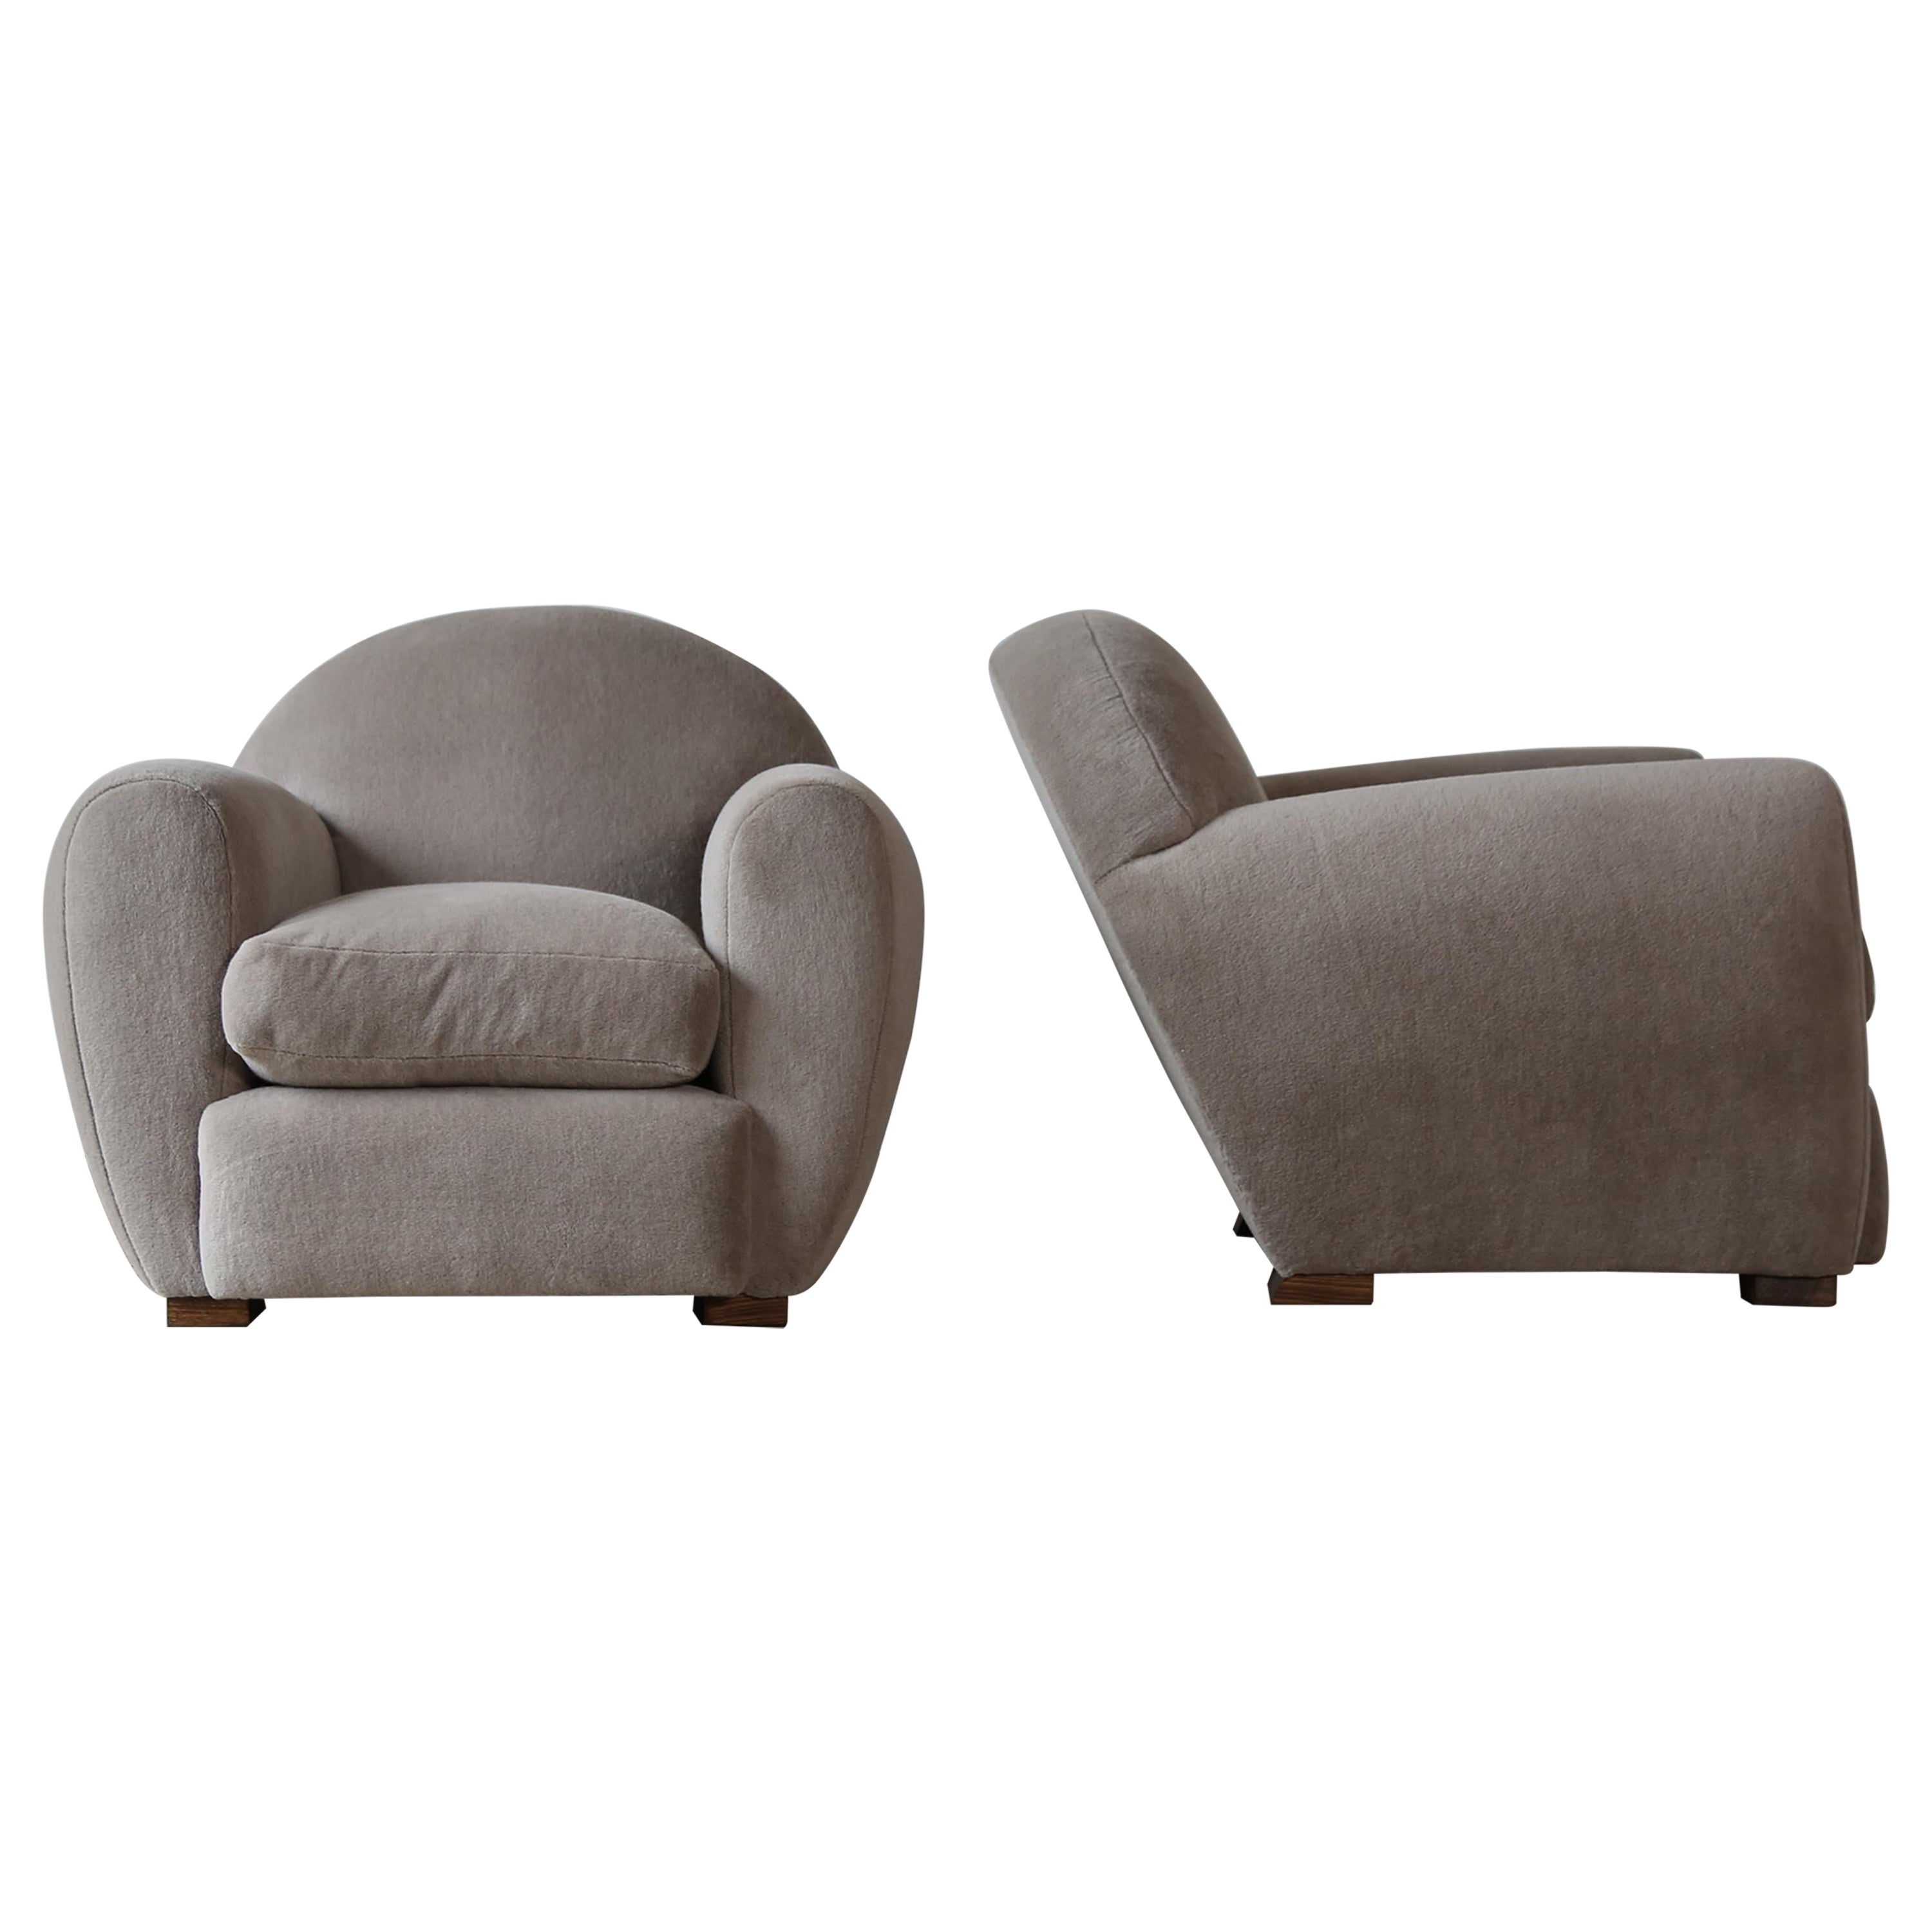 Superb Pair of Round Club Chairs, Upholstered in Pure Alpaca